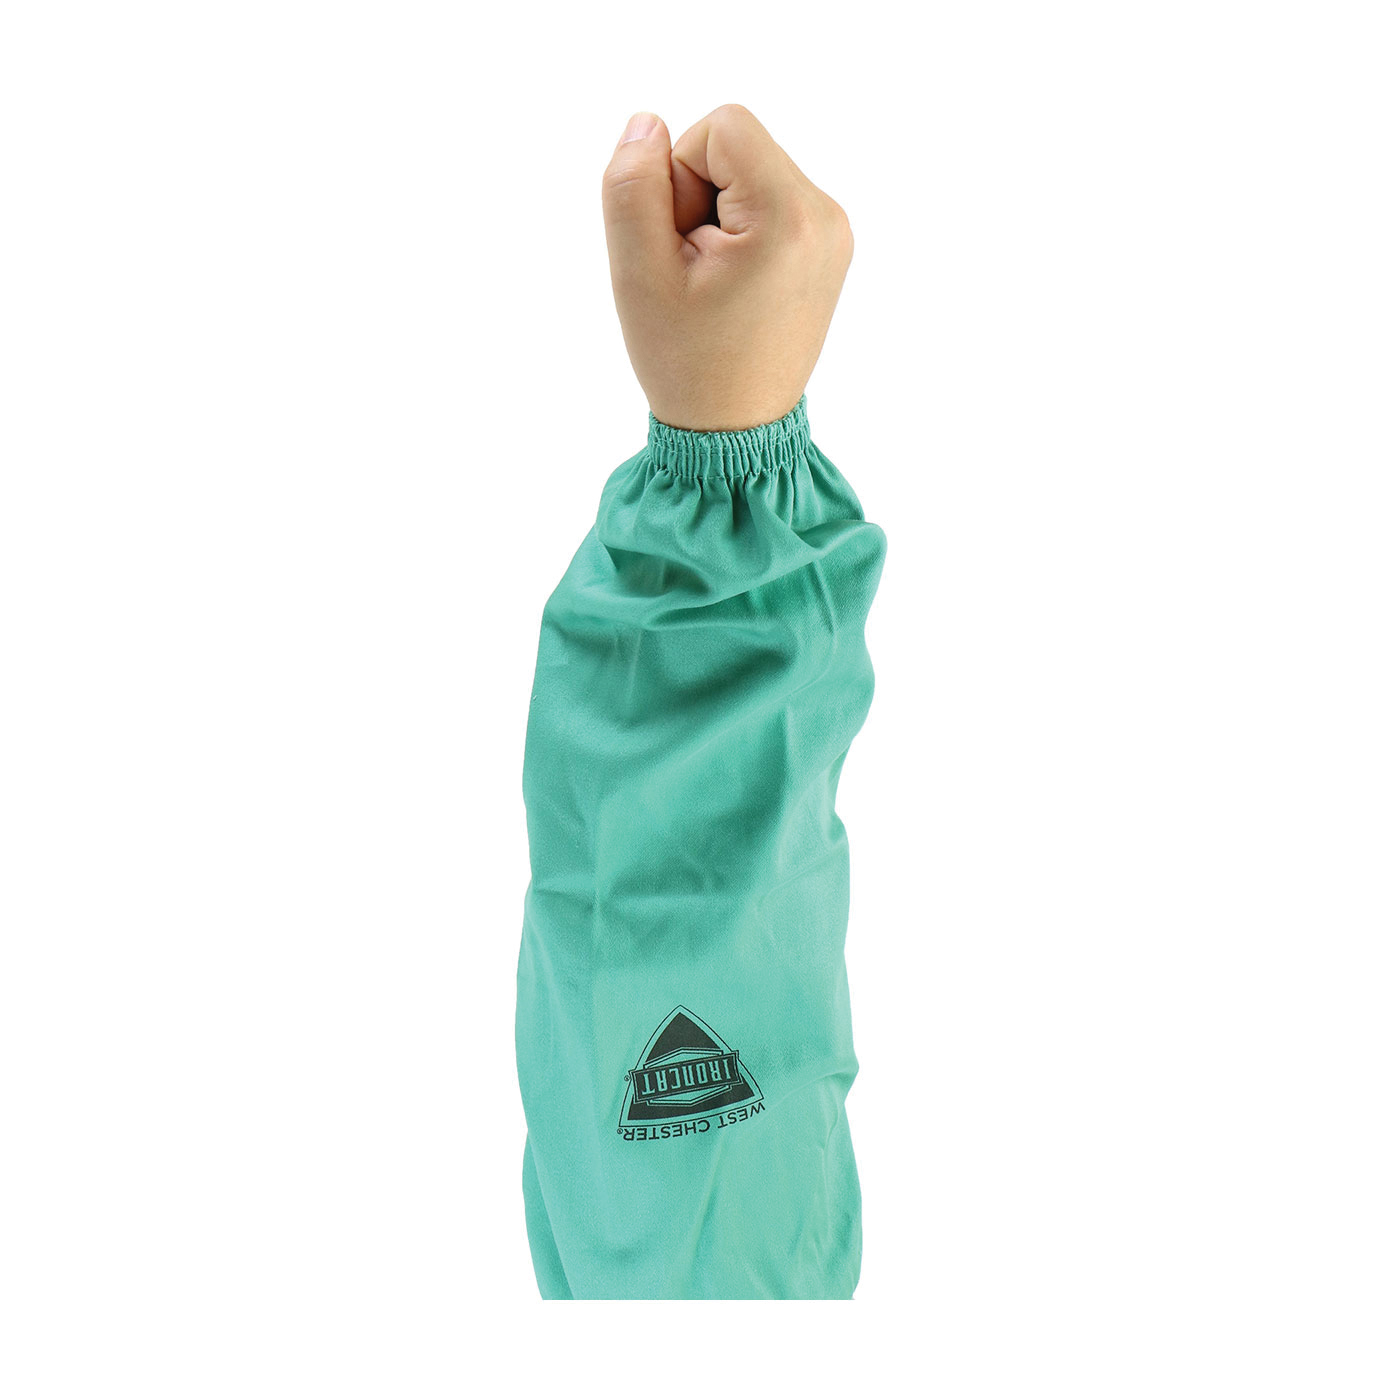 Ironcat® 7071/18 IRONTEX® 7071 Flame Resistant Sleeve, Universal, 19-1/2 in L, Cotton, Green